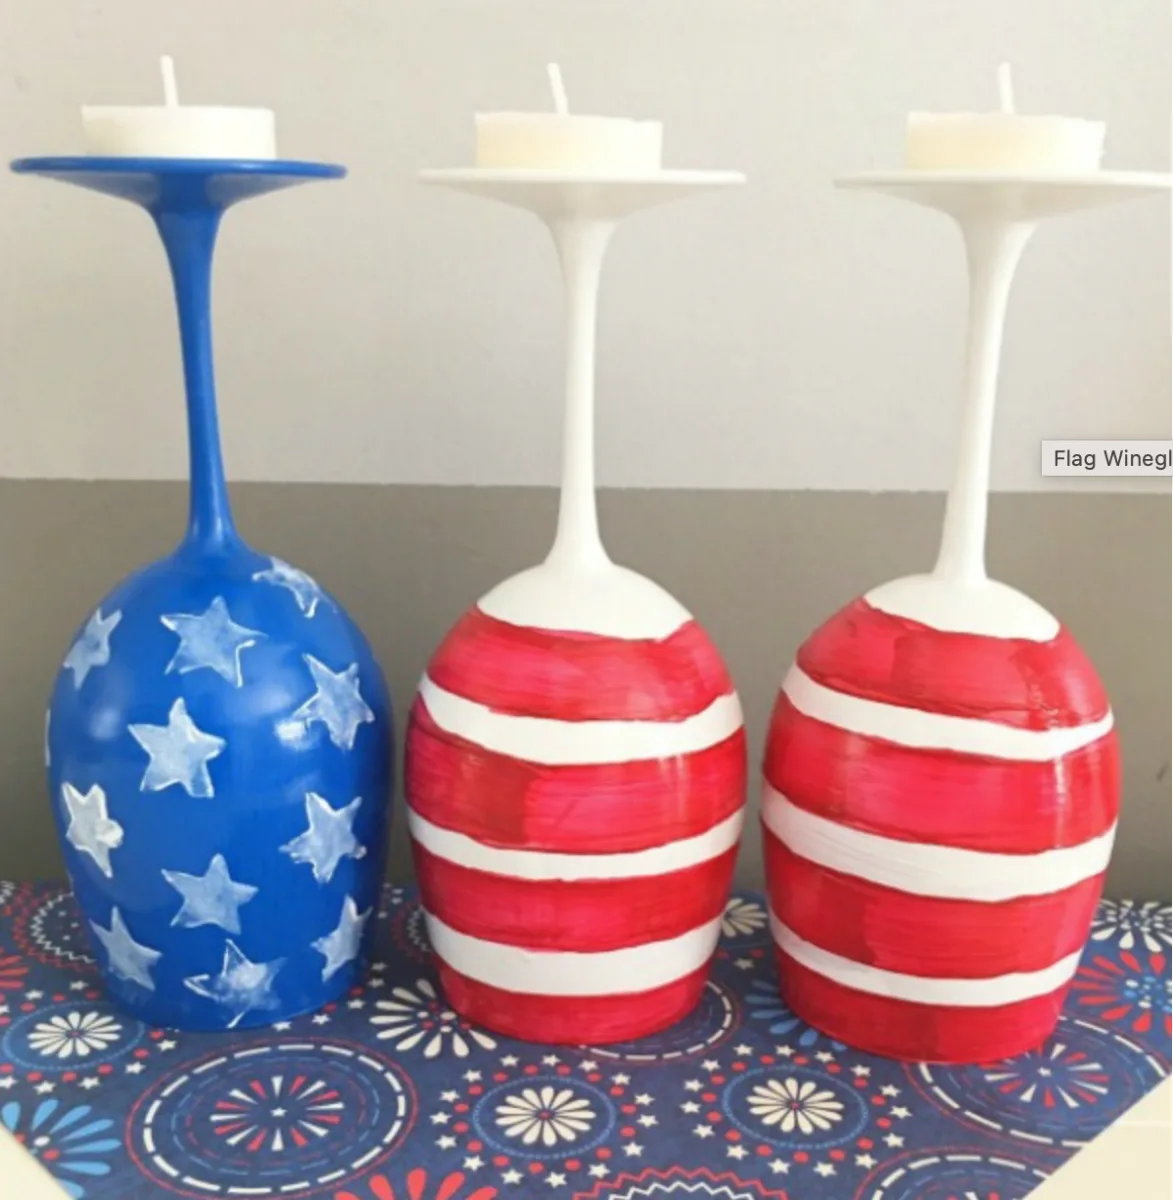 three wine glasses turned upside down and painted as an American flag